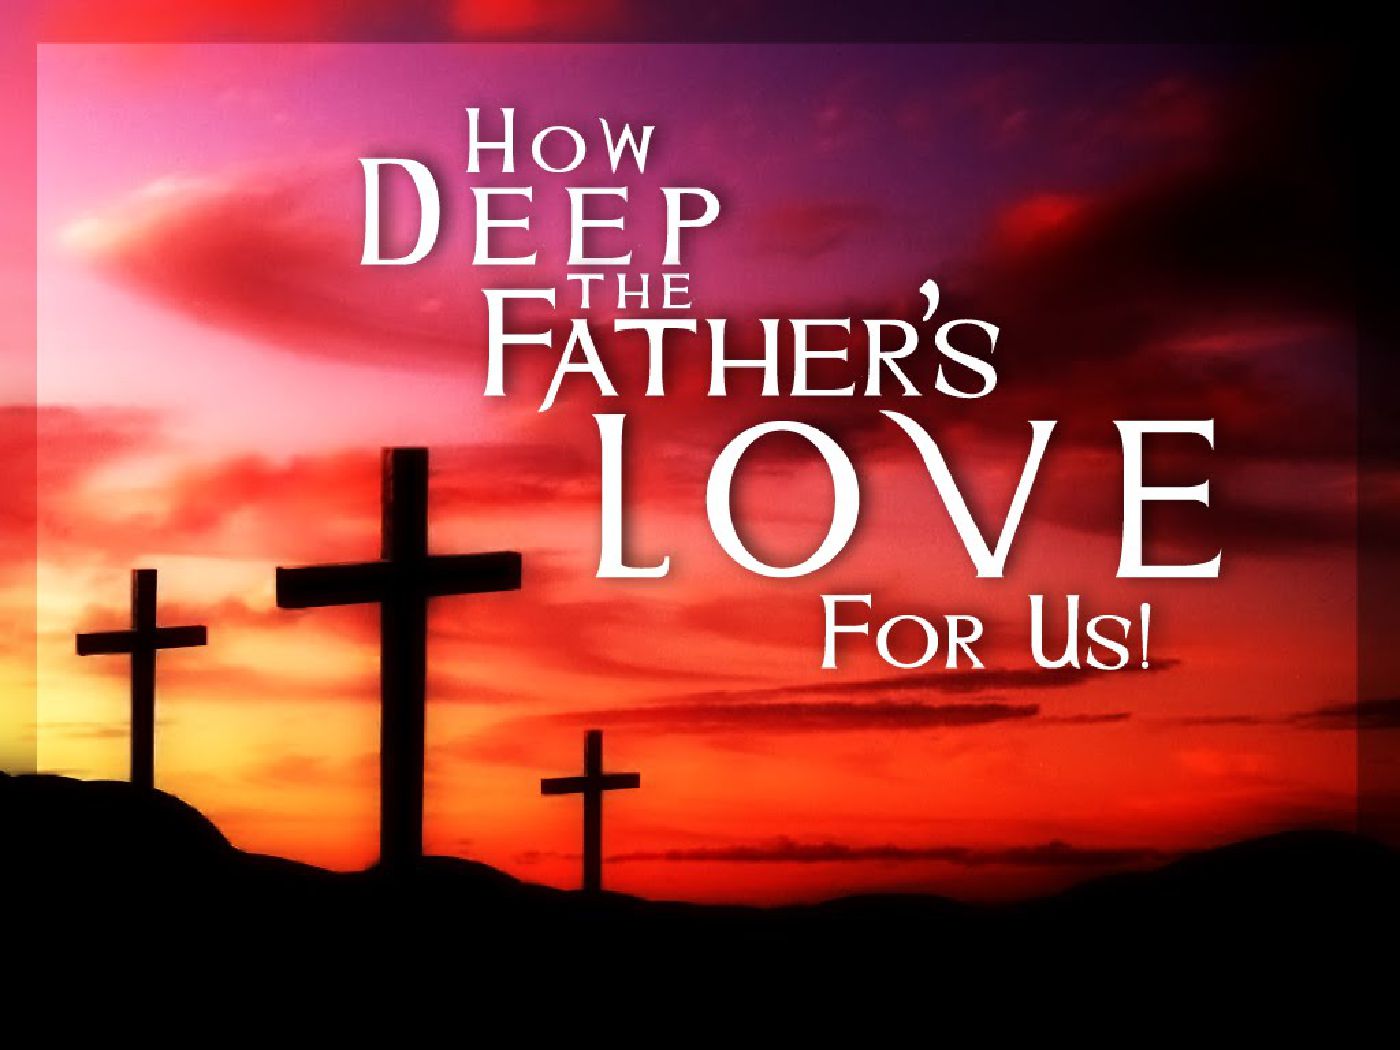 Image: How Deep the Father's Love for Us